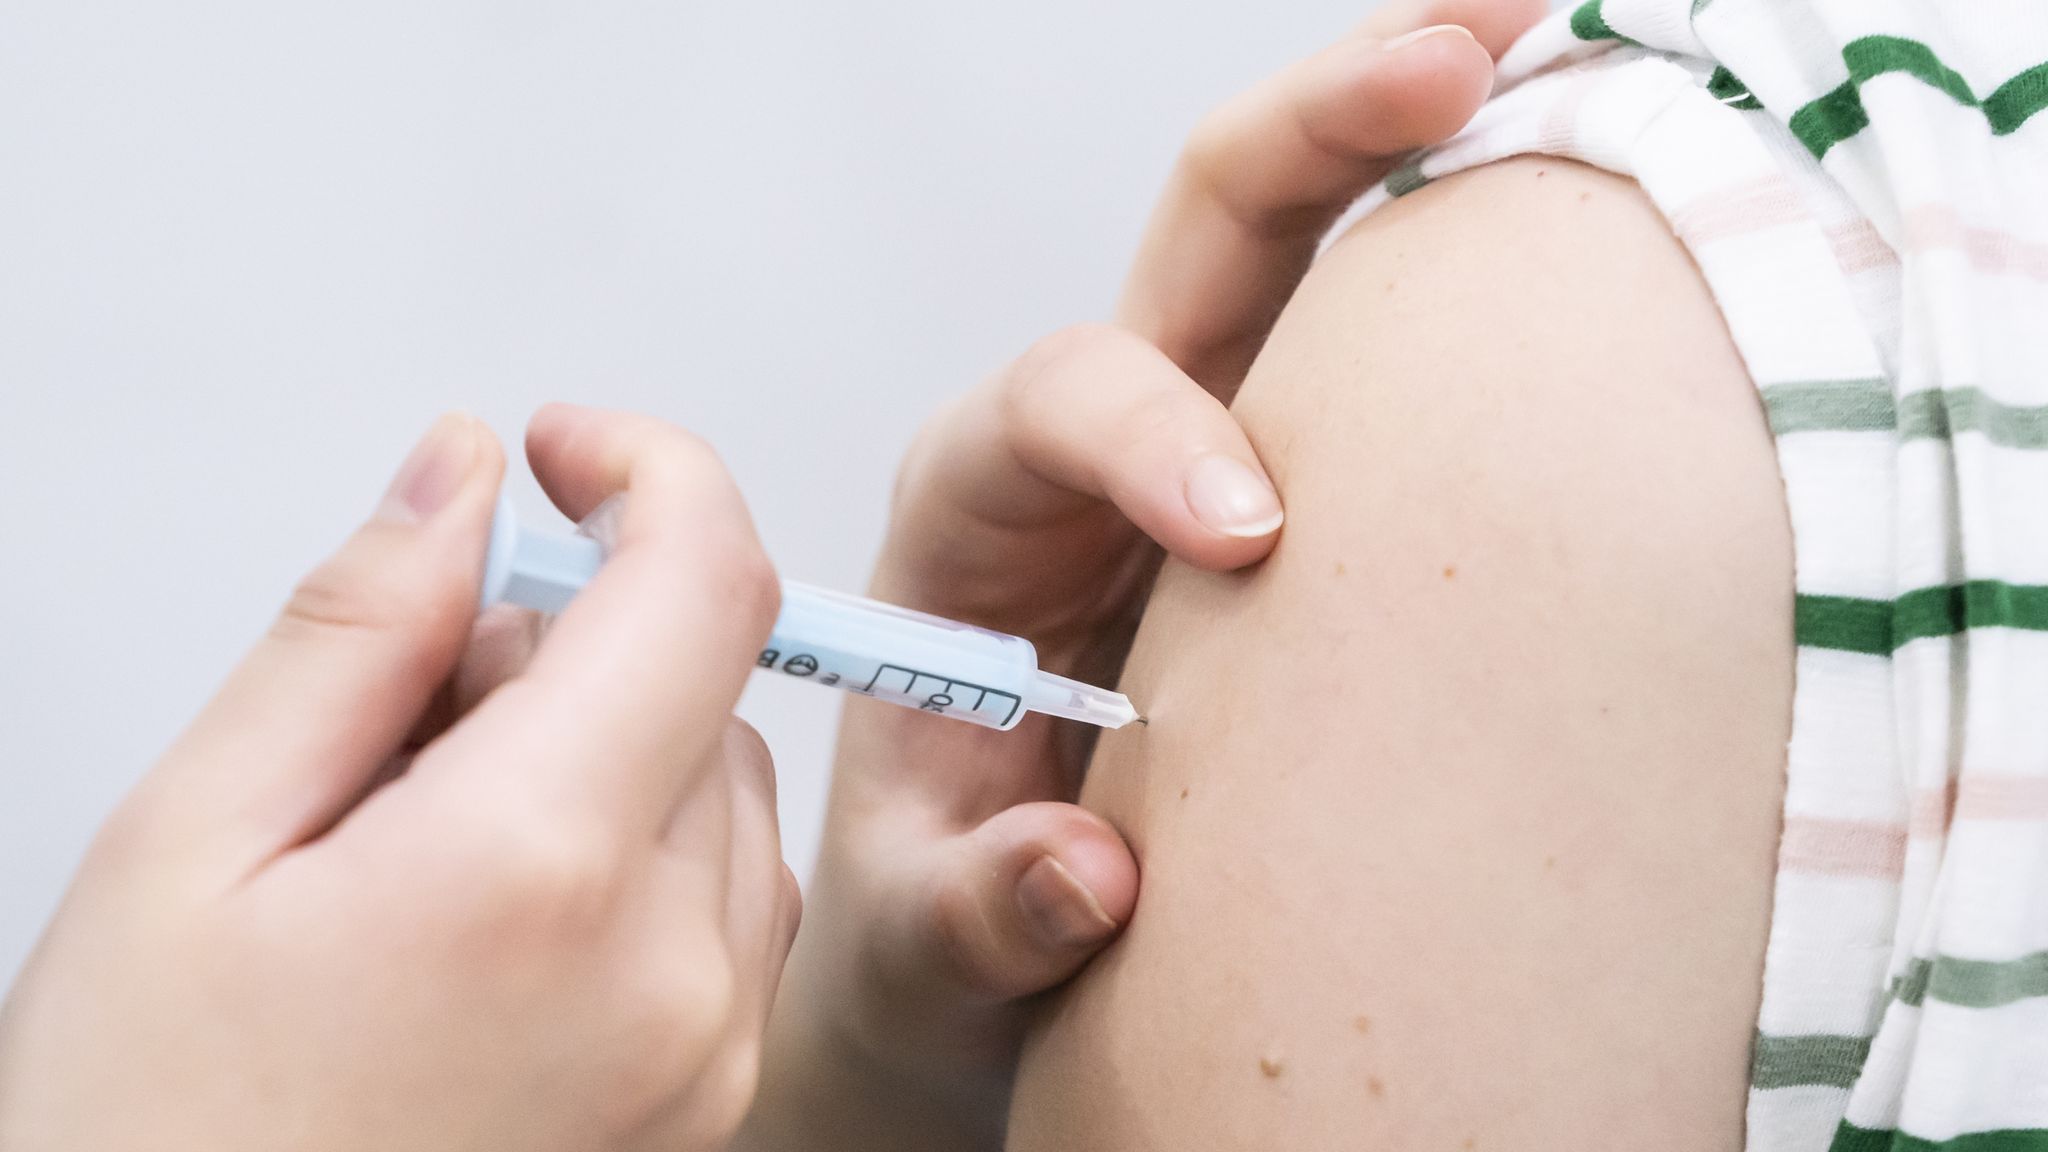 COVID vaccines could soon be sold on high street, retailers say